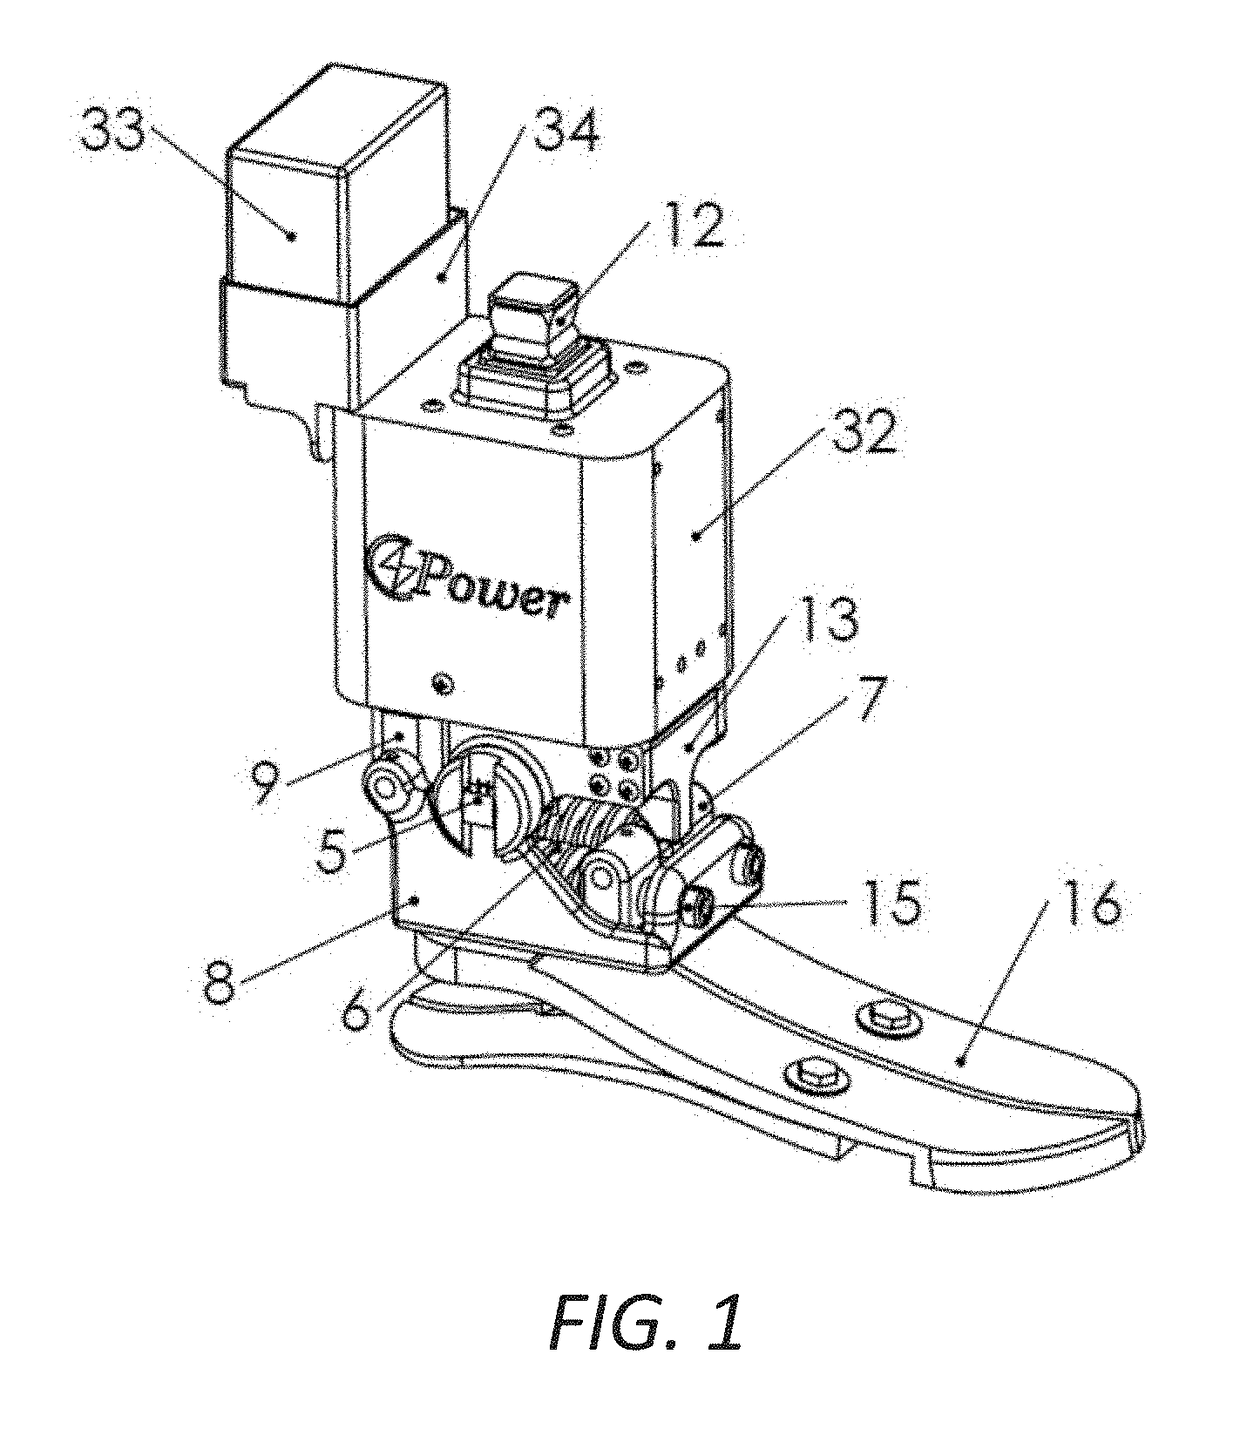 Ankle-Foot Prosthesis Device